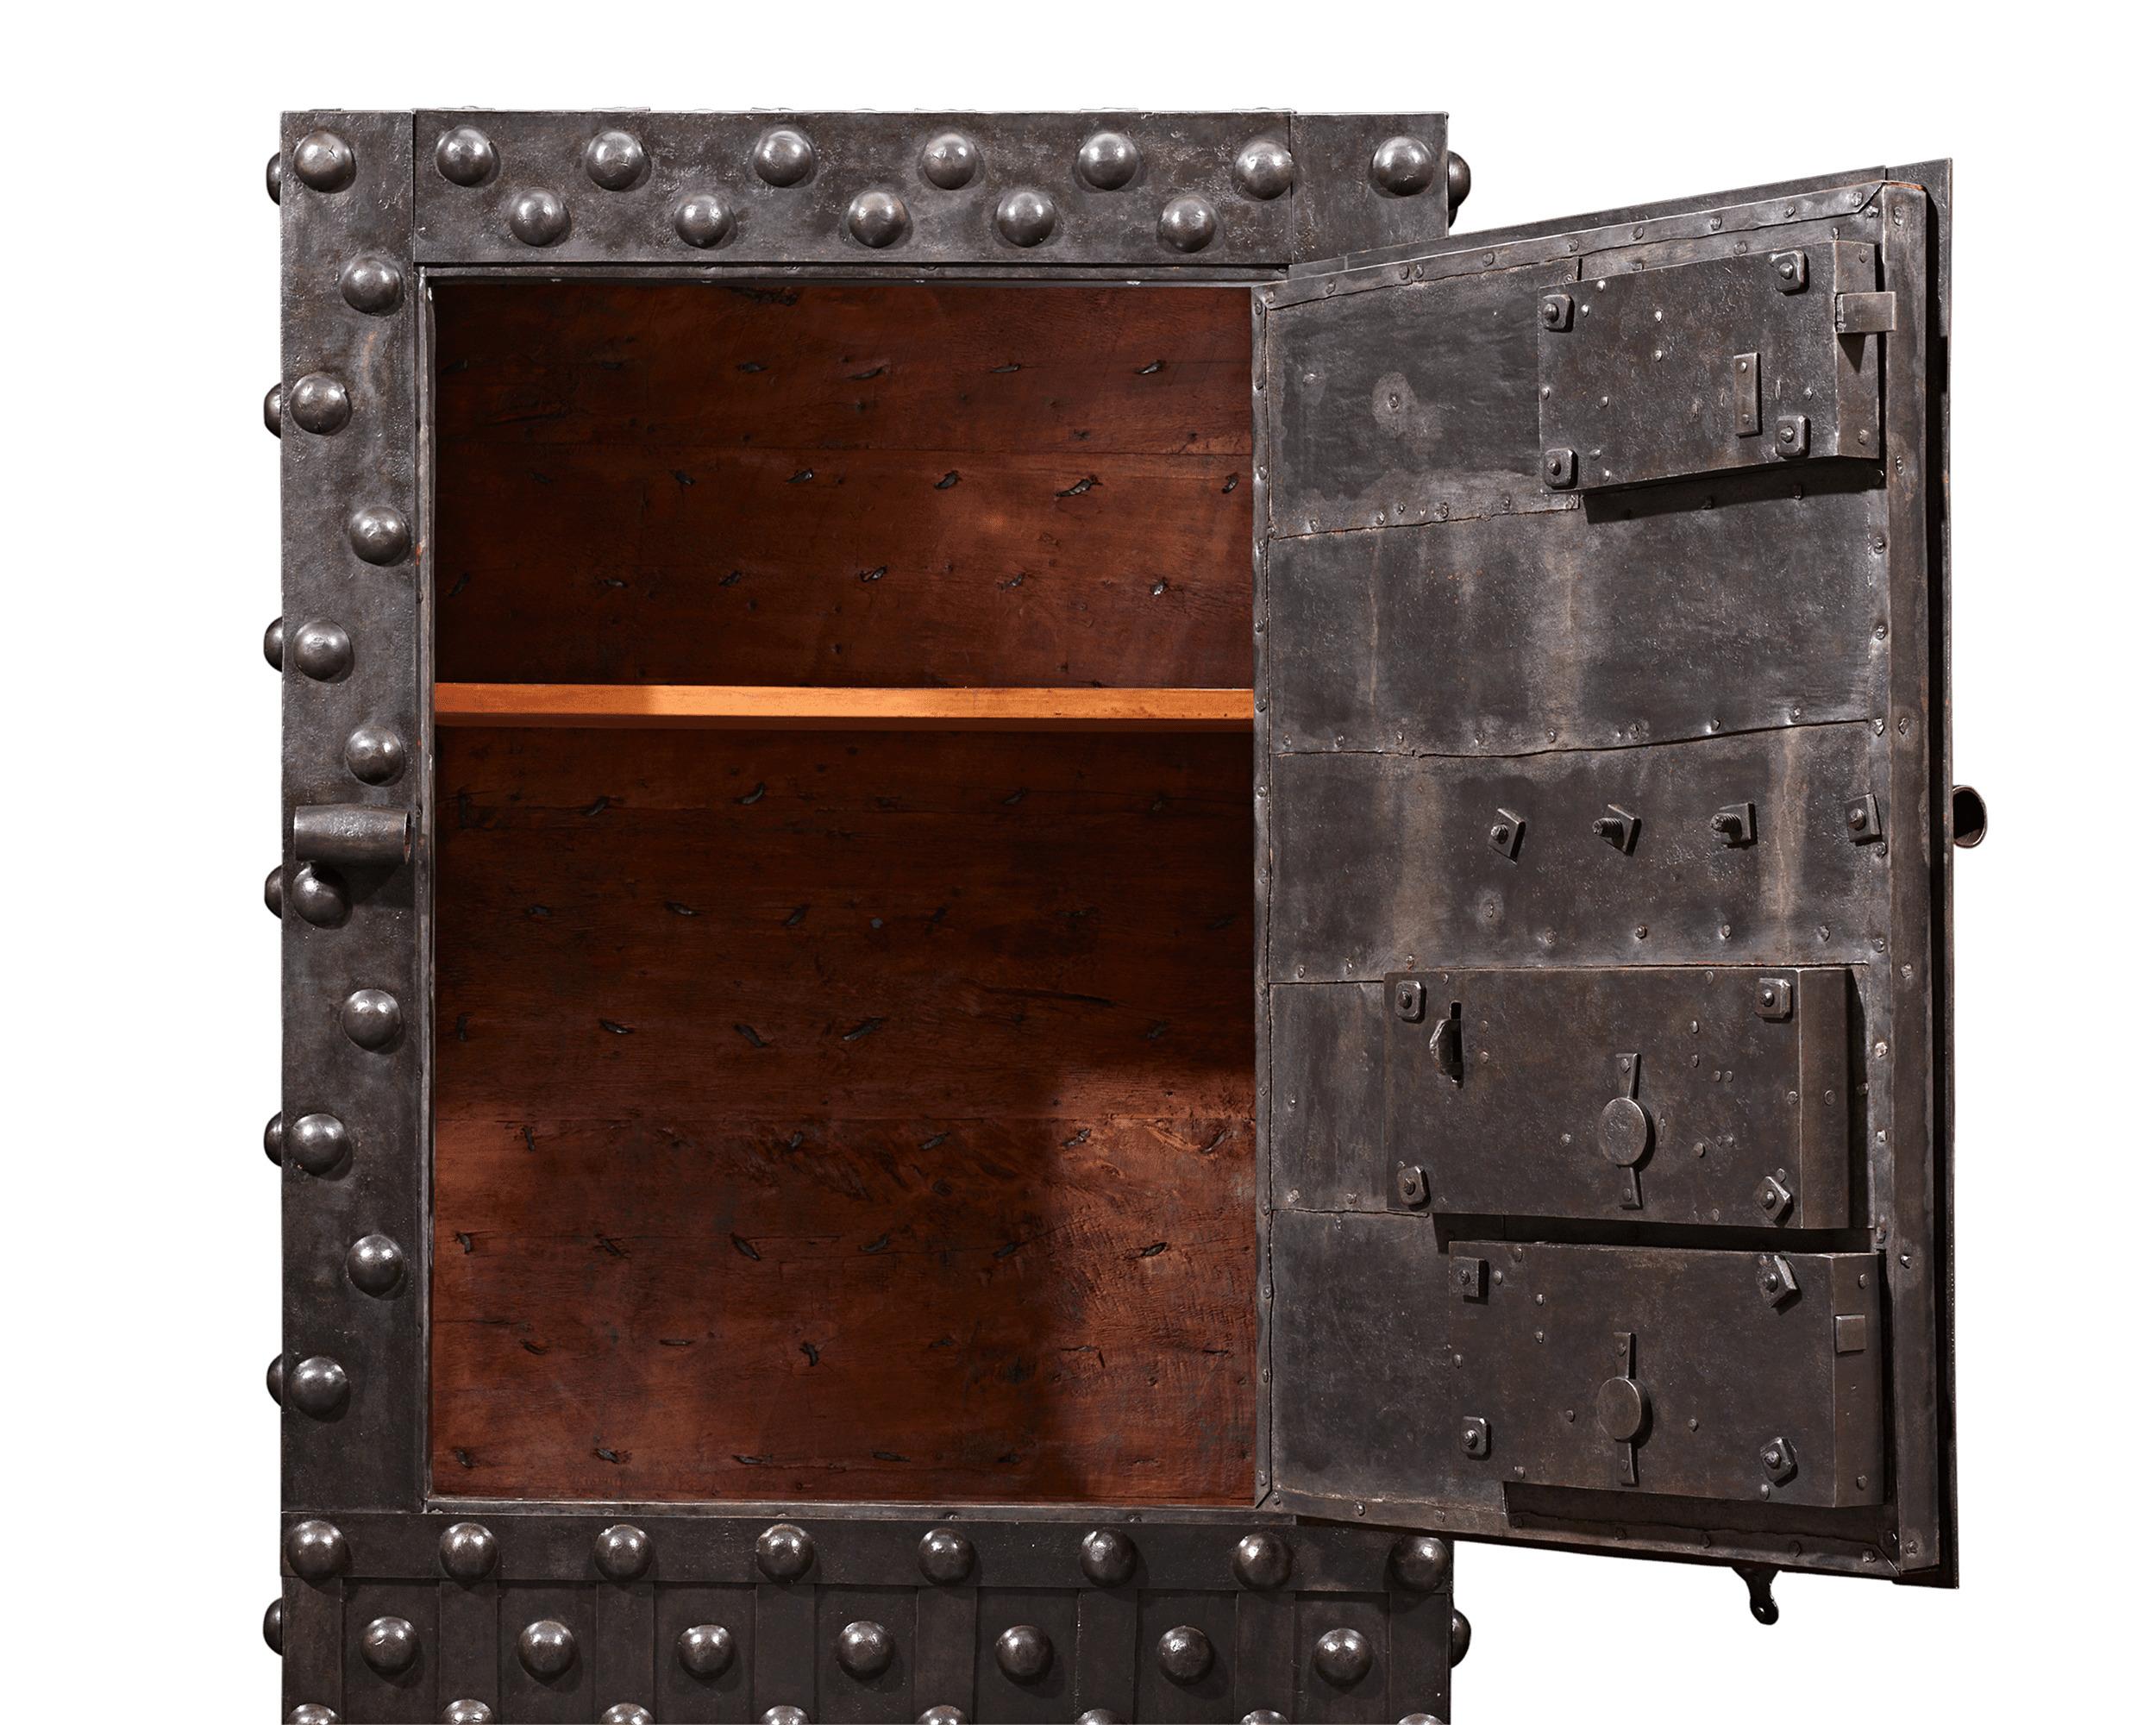 This rare Italian Baroque safe is crafted of reinforced wrought iron and is designed to be virtually indestructible. Intended to secure one's most precious valuables, the fascinating structure is enveloped in thick iron strapwork that surrounds its